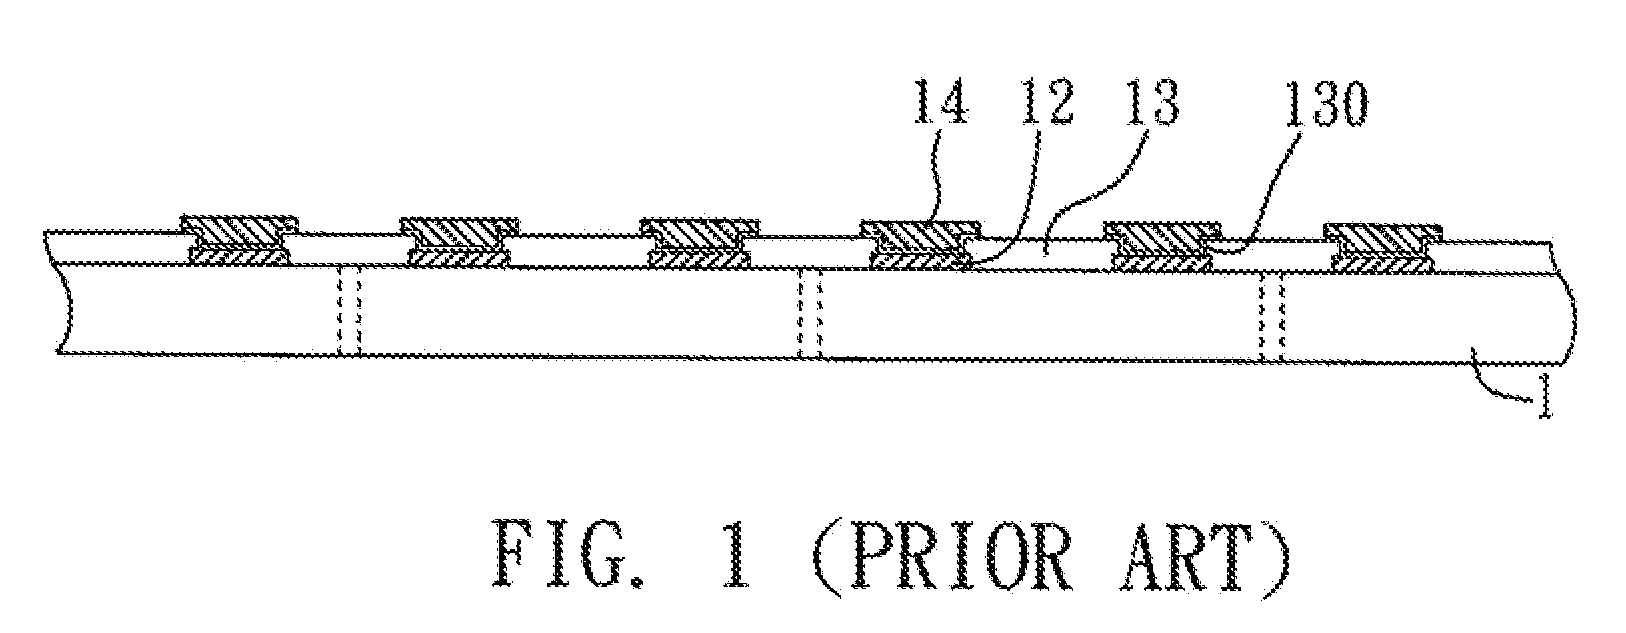 Carrier board structure with embedded semiconductor chip and fabrication method thereof